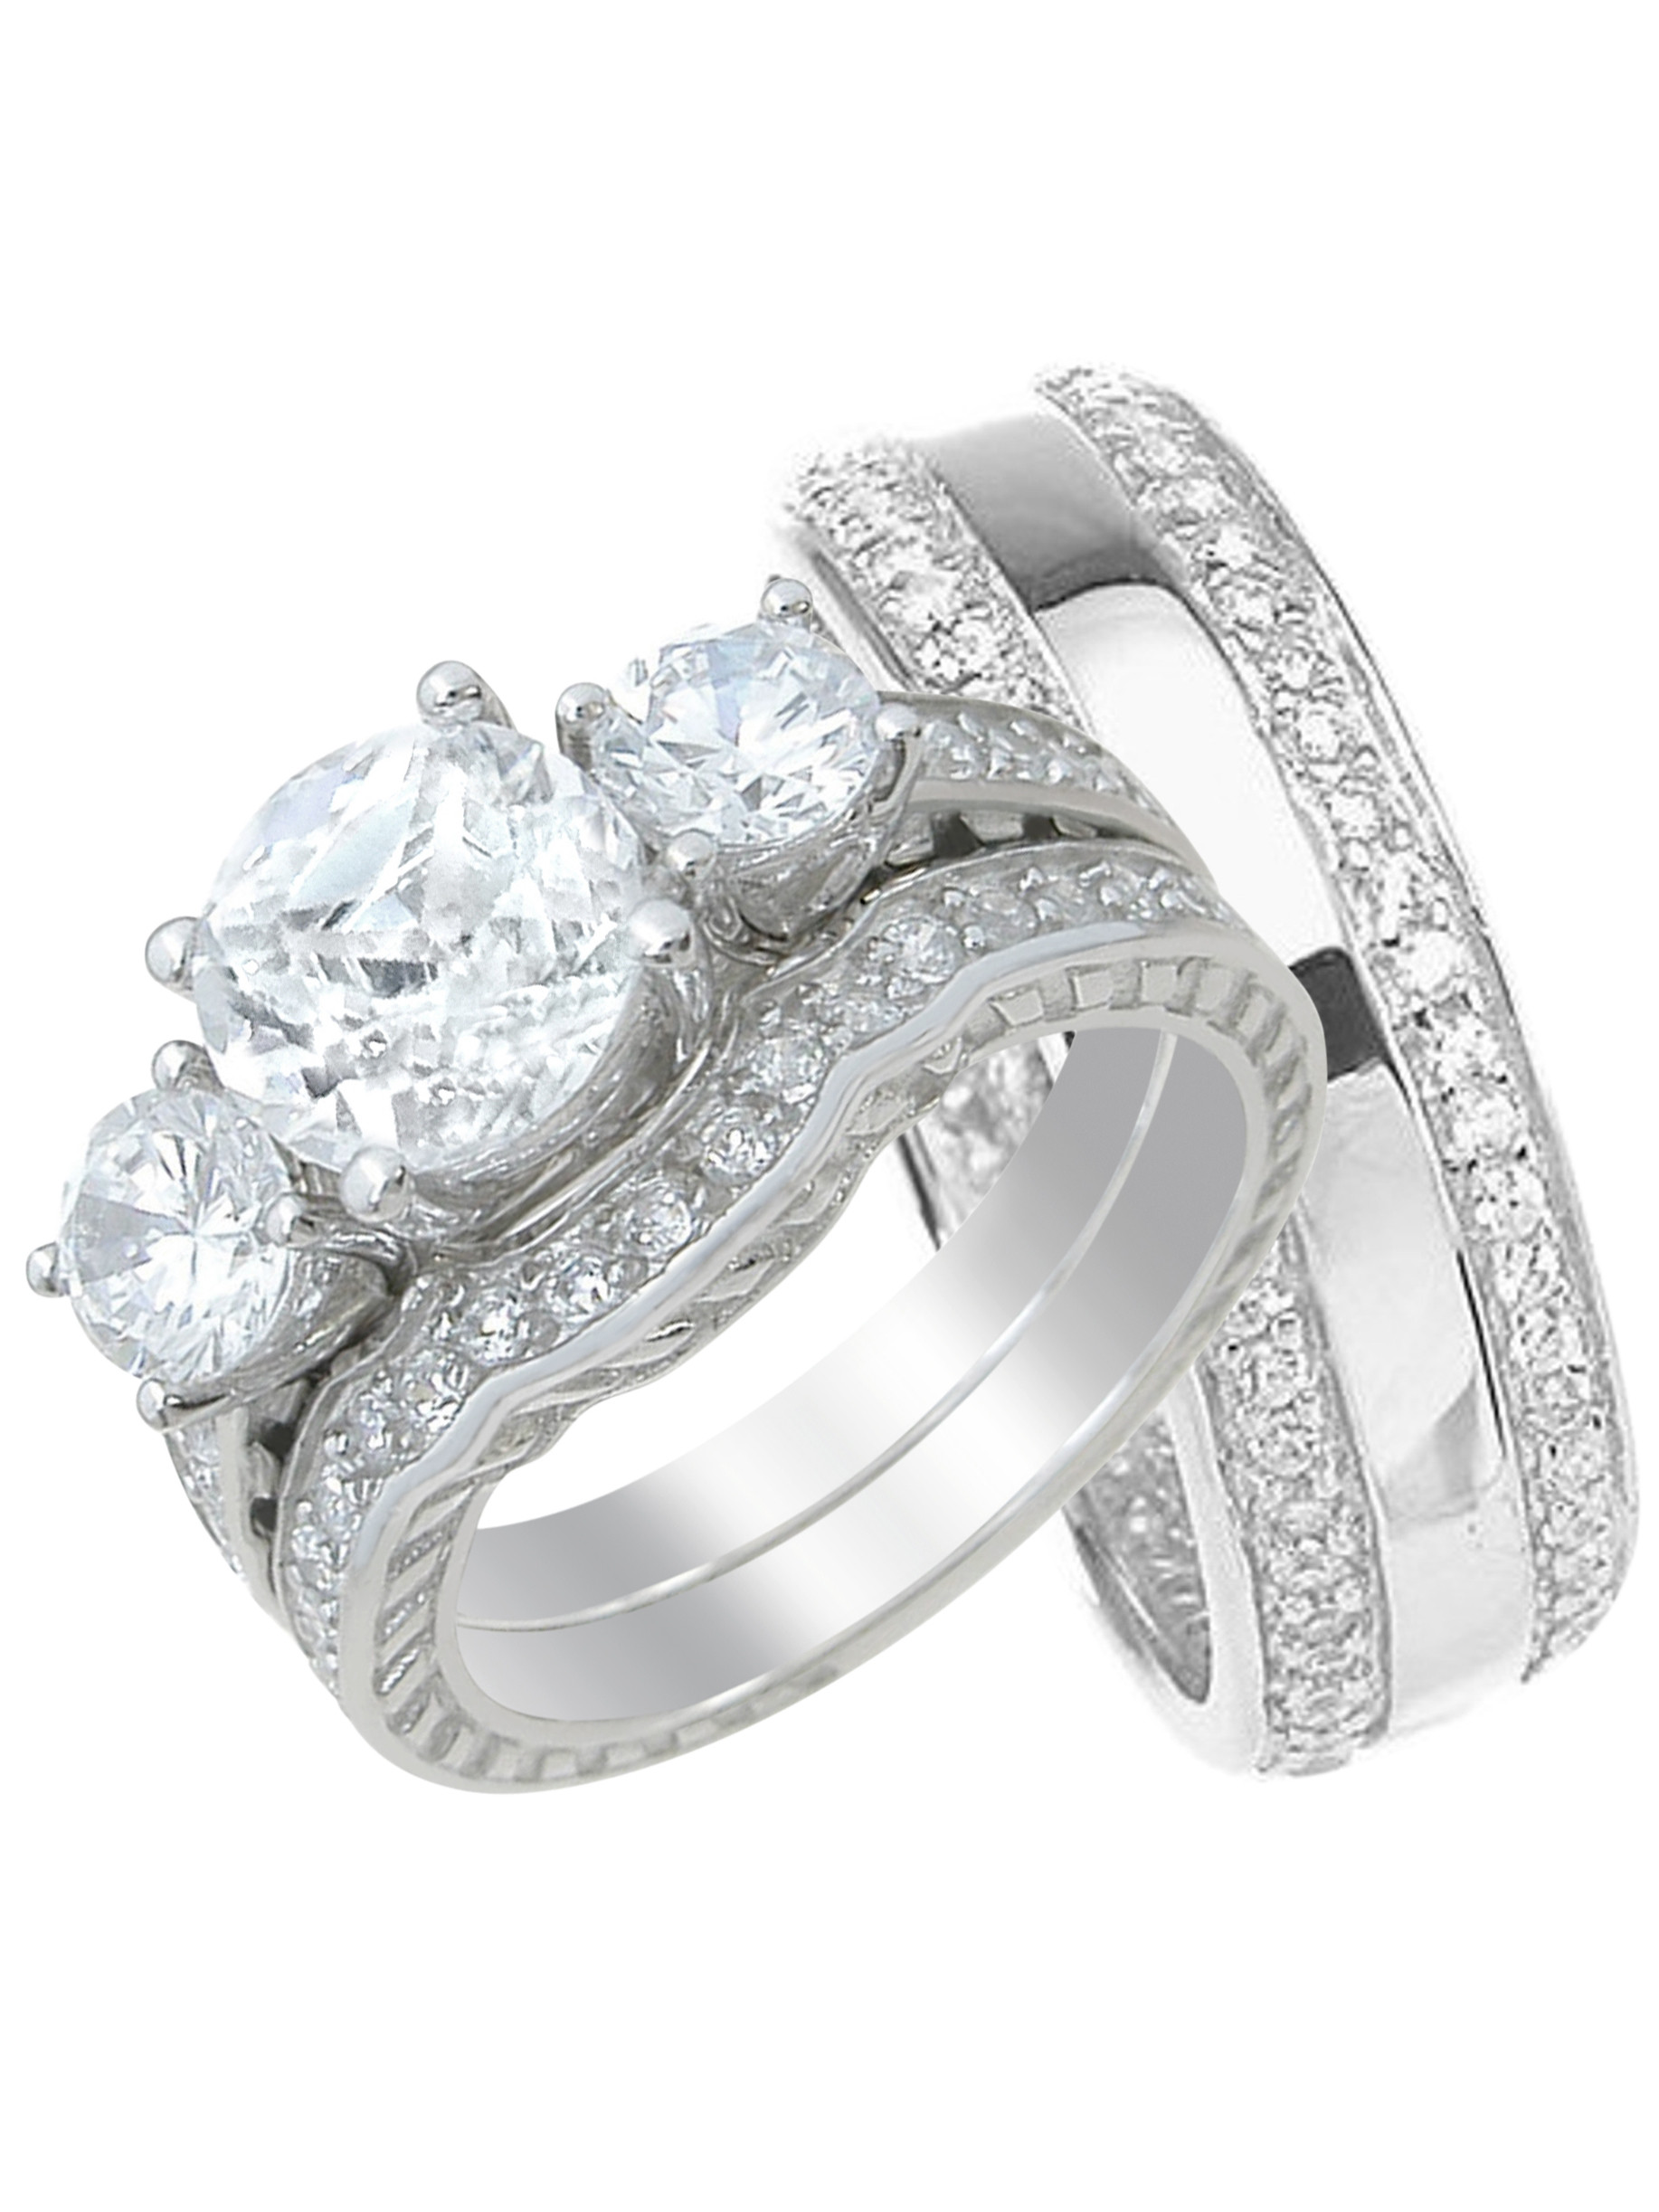 Sterling Silver Wedding Bands For Him
 His and Hers High Quality CZ Wedding Ring Set Matching